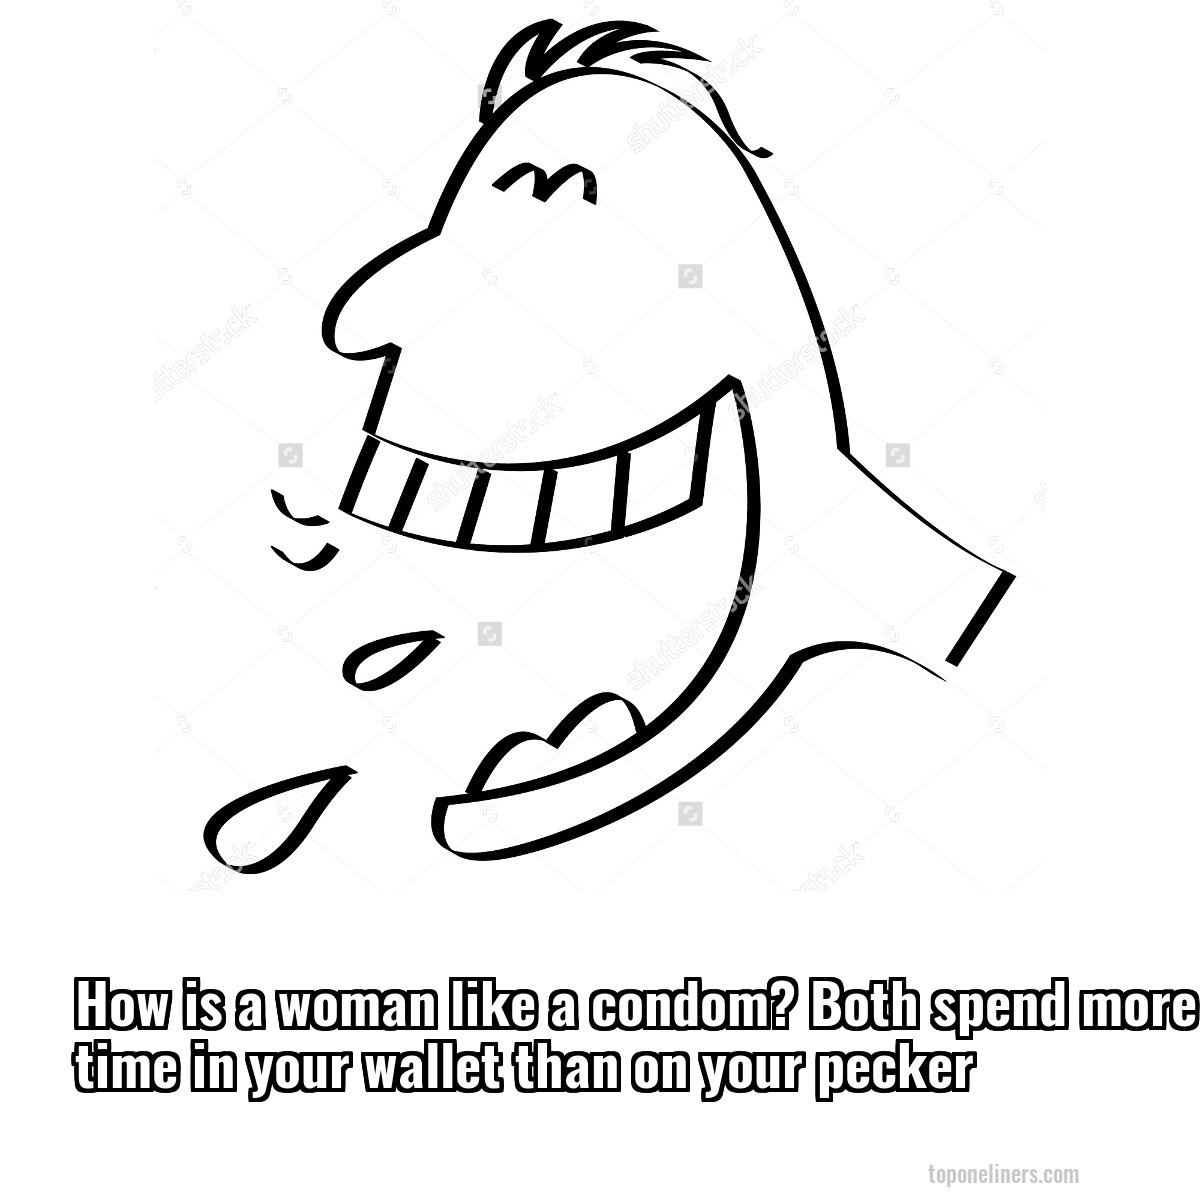 How is a woman like a condom? Both spend more time in your wallet than on your pecker
